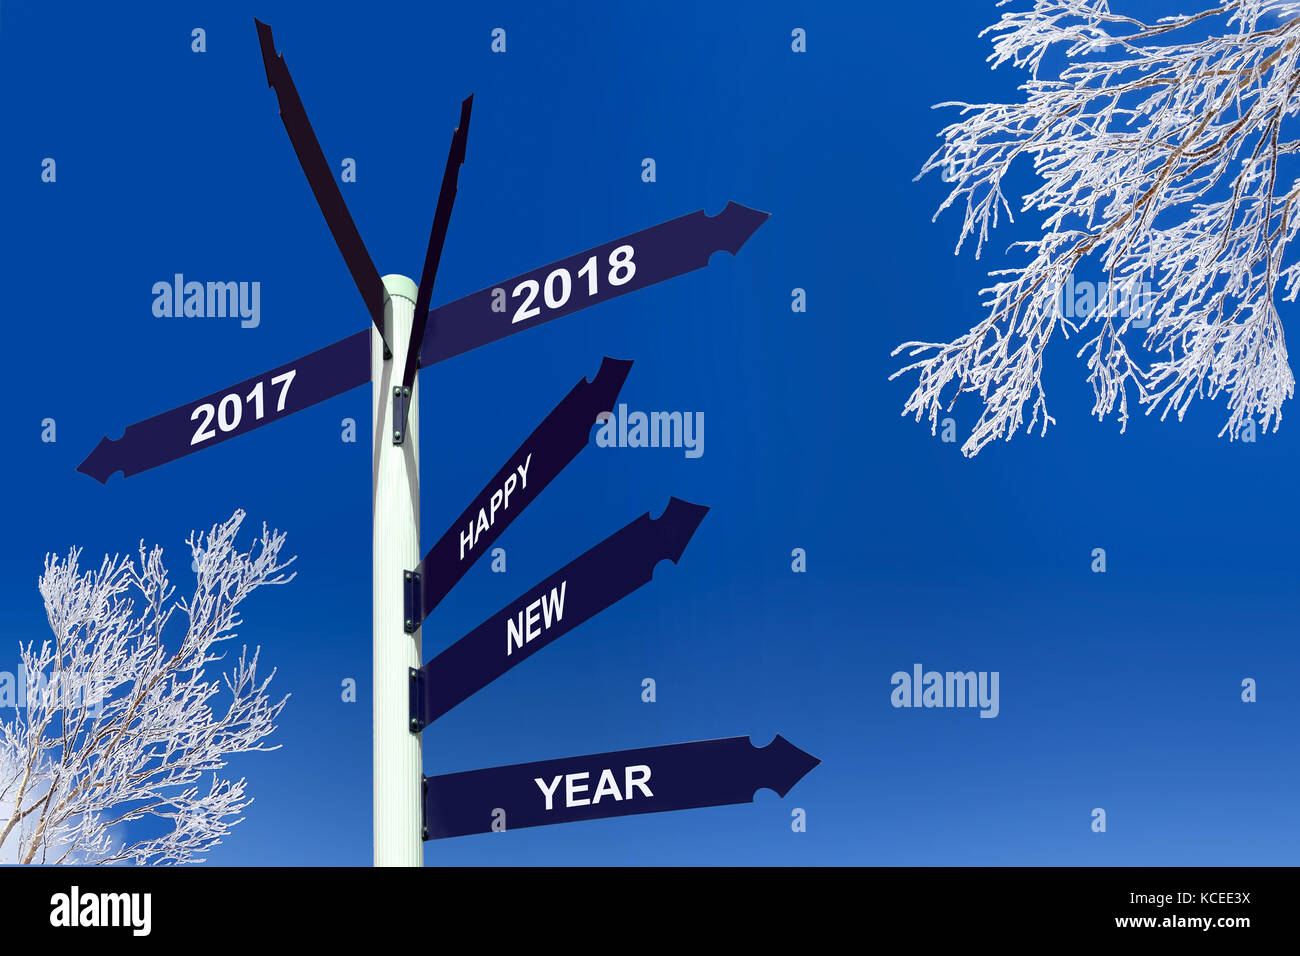 Happy new year 2018 on direction panels, snowy trees Stock Photo